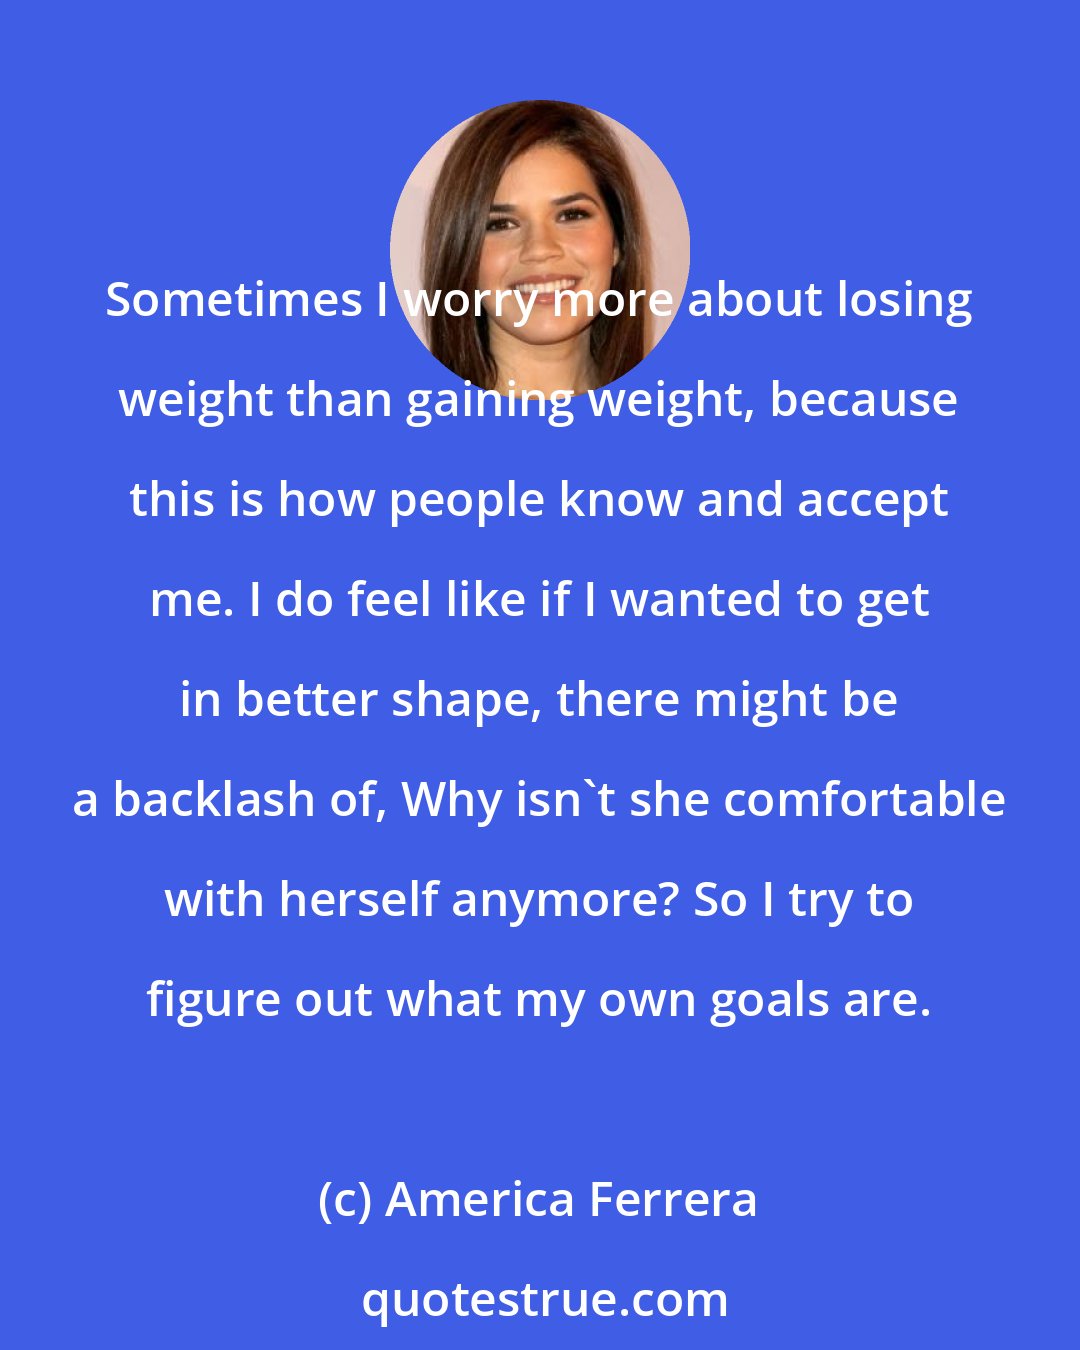 America Ferrera: Sometimes I worry more about losing weight than gaining weight, because this is how people know and accept me. I do feel like if I wanted to get in better shape, there might be a backlash of, Why isn't she comfortable with herself anymore? So I try to figure out what my own goals are.